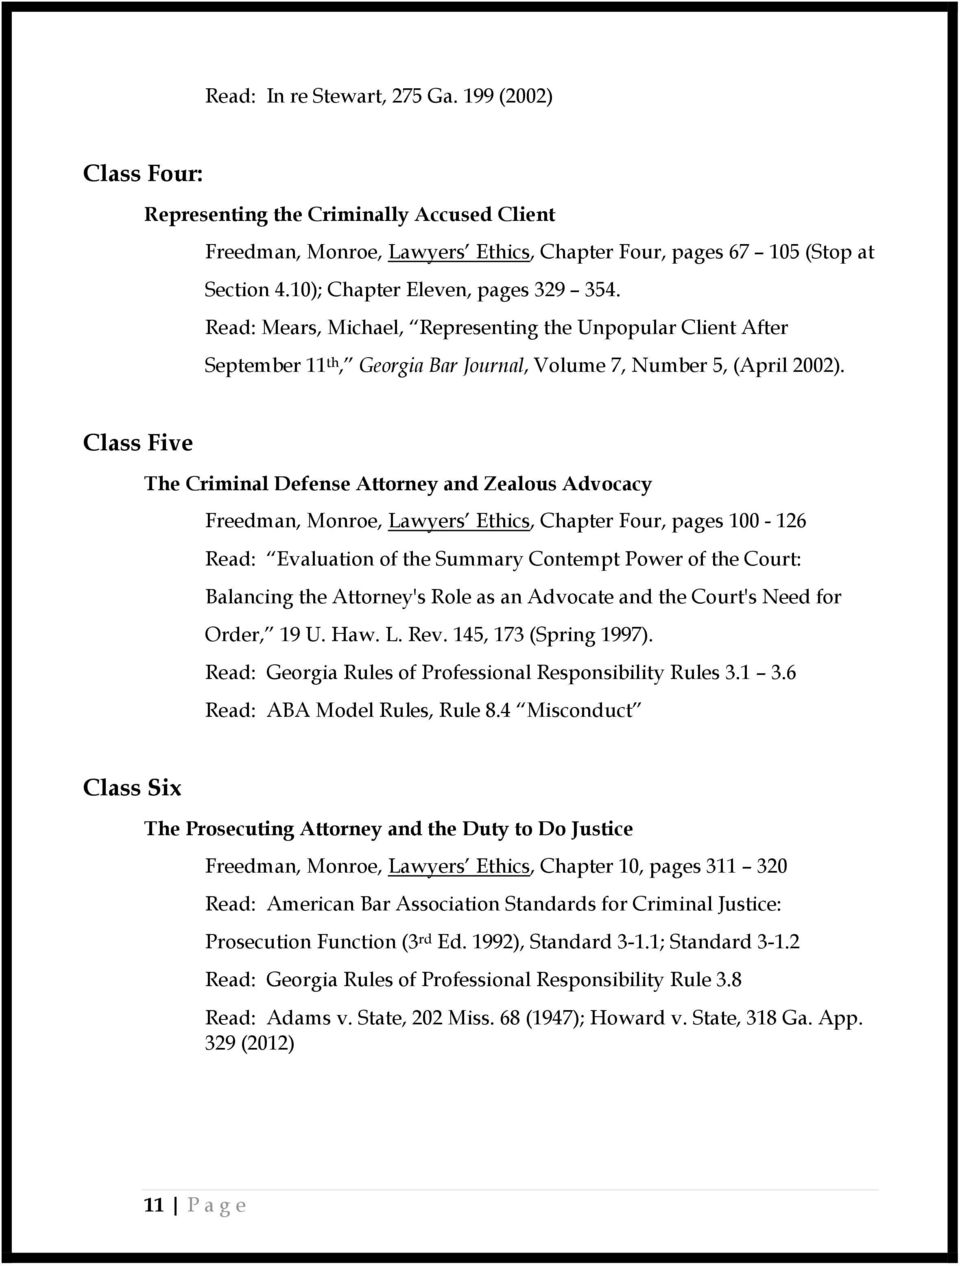 Class Five The Criminal Defense Attorney and Zealous Advocacy Freedman, Monroe, Lawyers Ethics, Chapter Four, pages 100-126 Read: Evaluation of the Summary Contempt Power of the Court: Balancing the